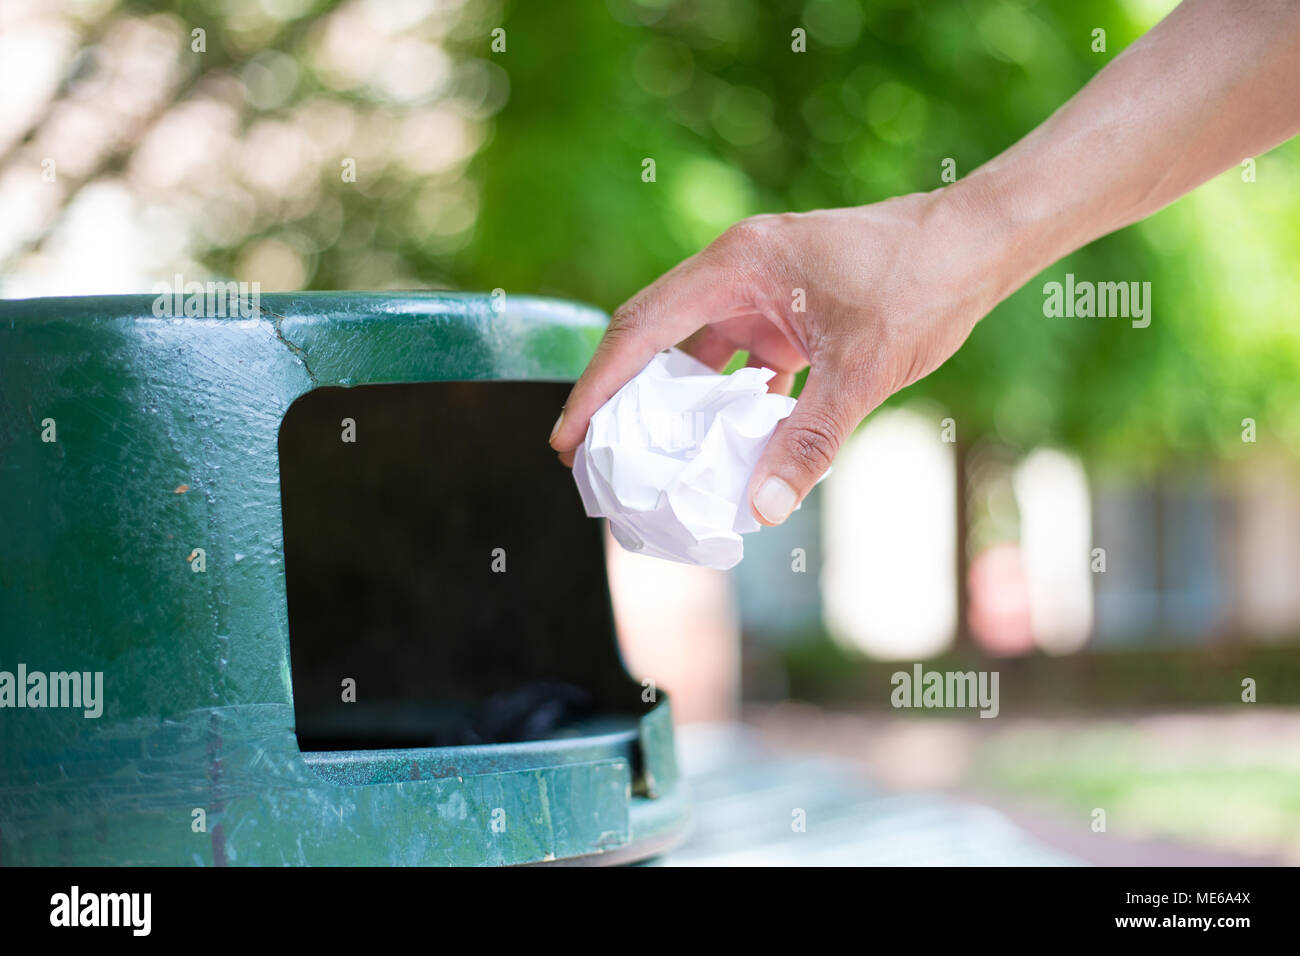 Closeup cropped portrait of someone tossing crumpled piece of paper in trash can, isolated outdoors green trees background Stock Photo